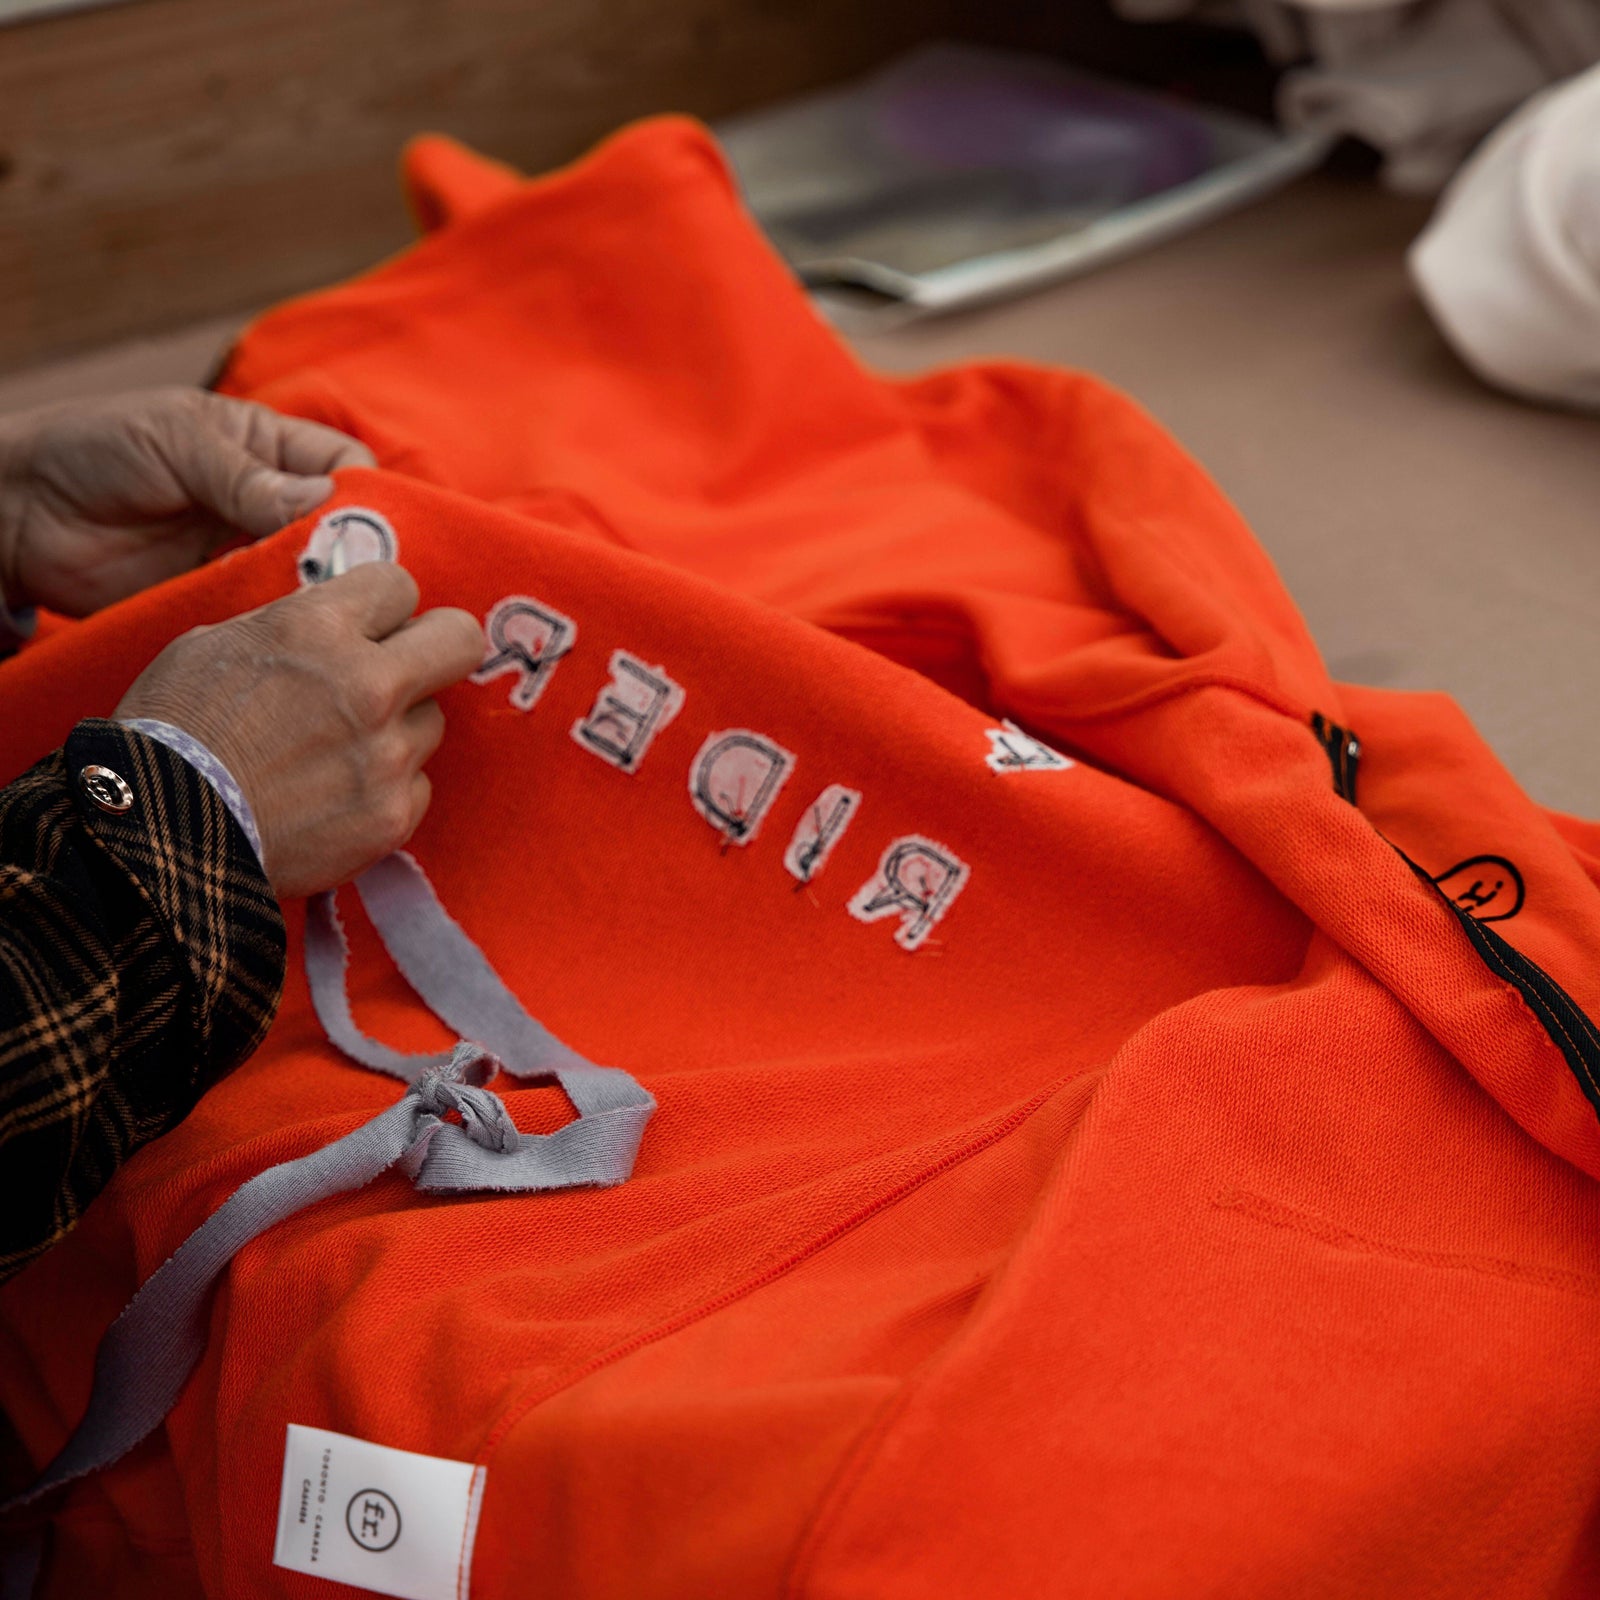 Man stitching the inside of an orange Foreign Rider sweater